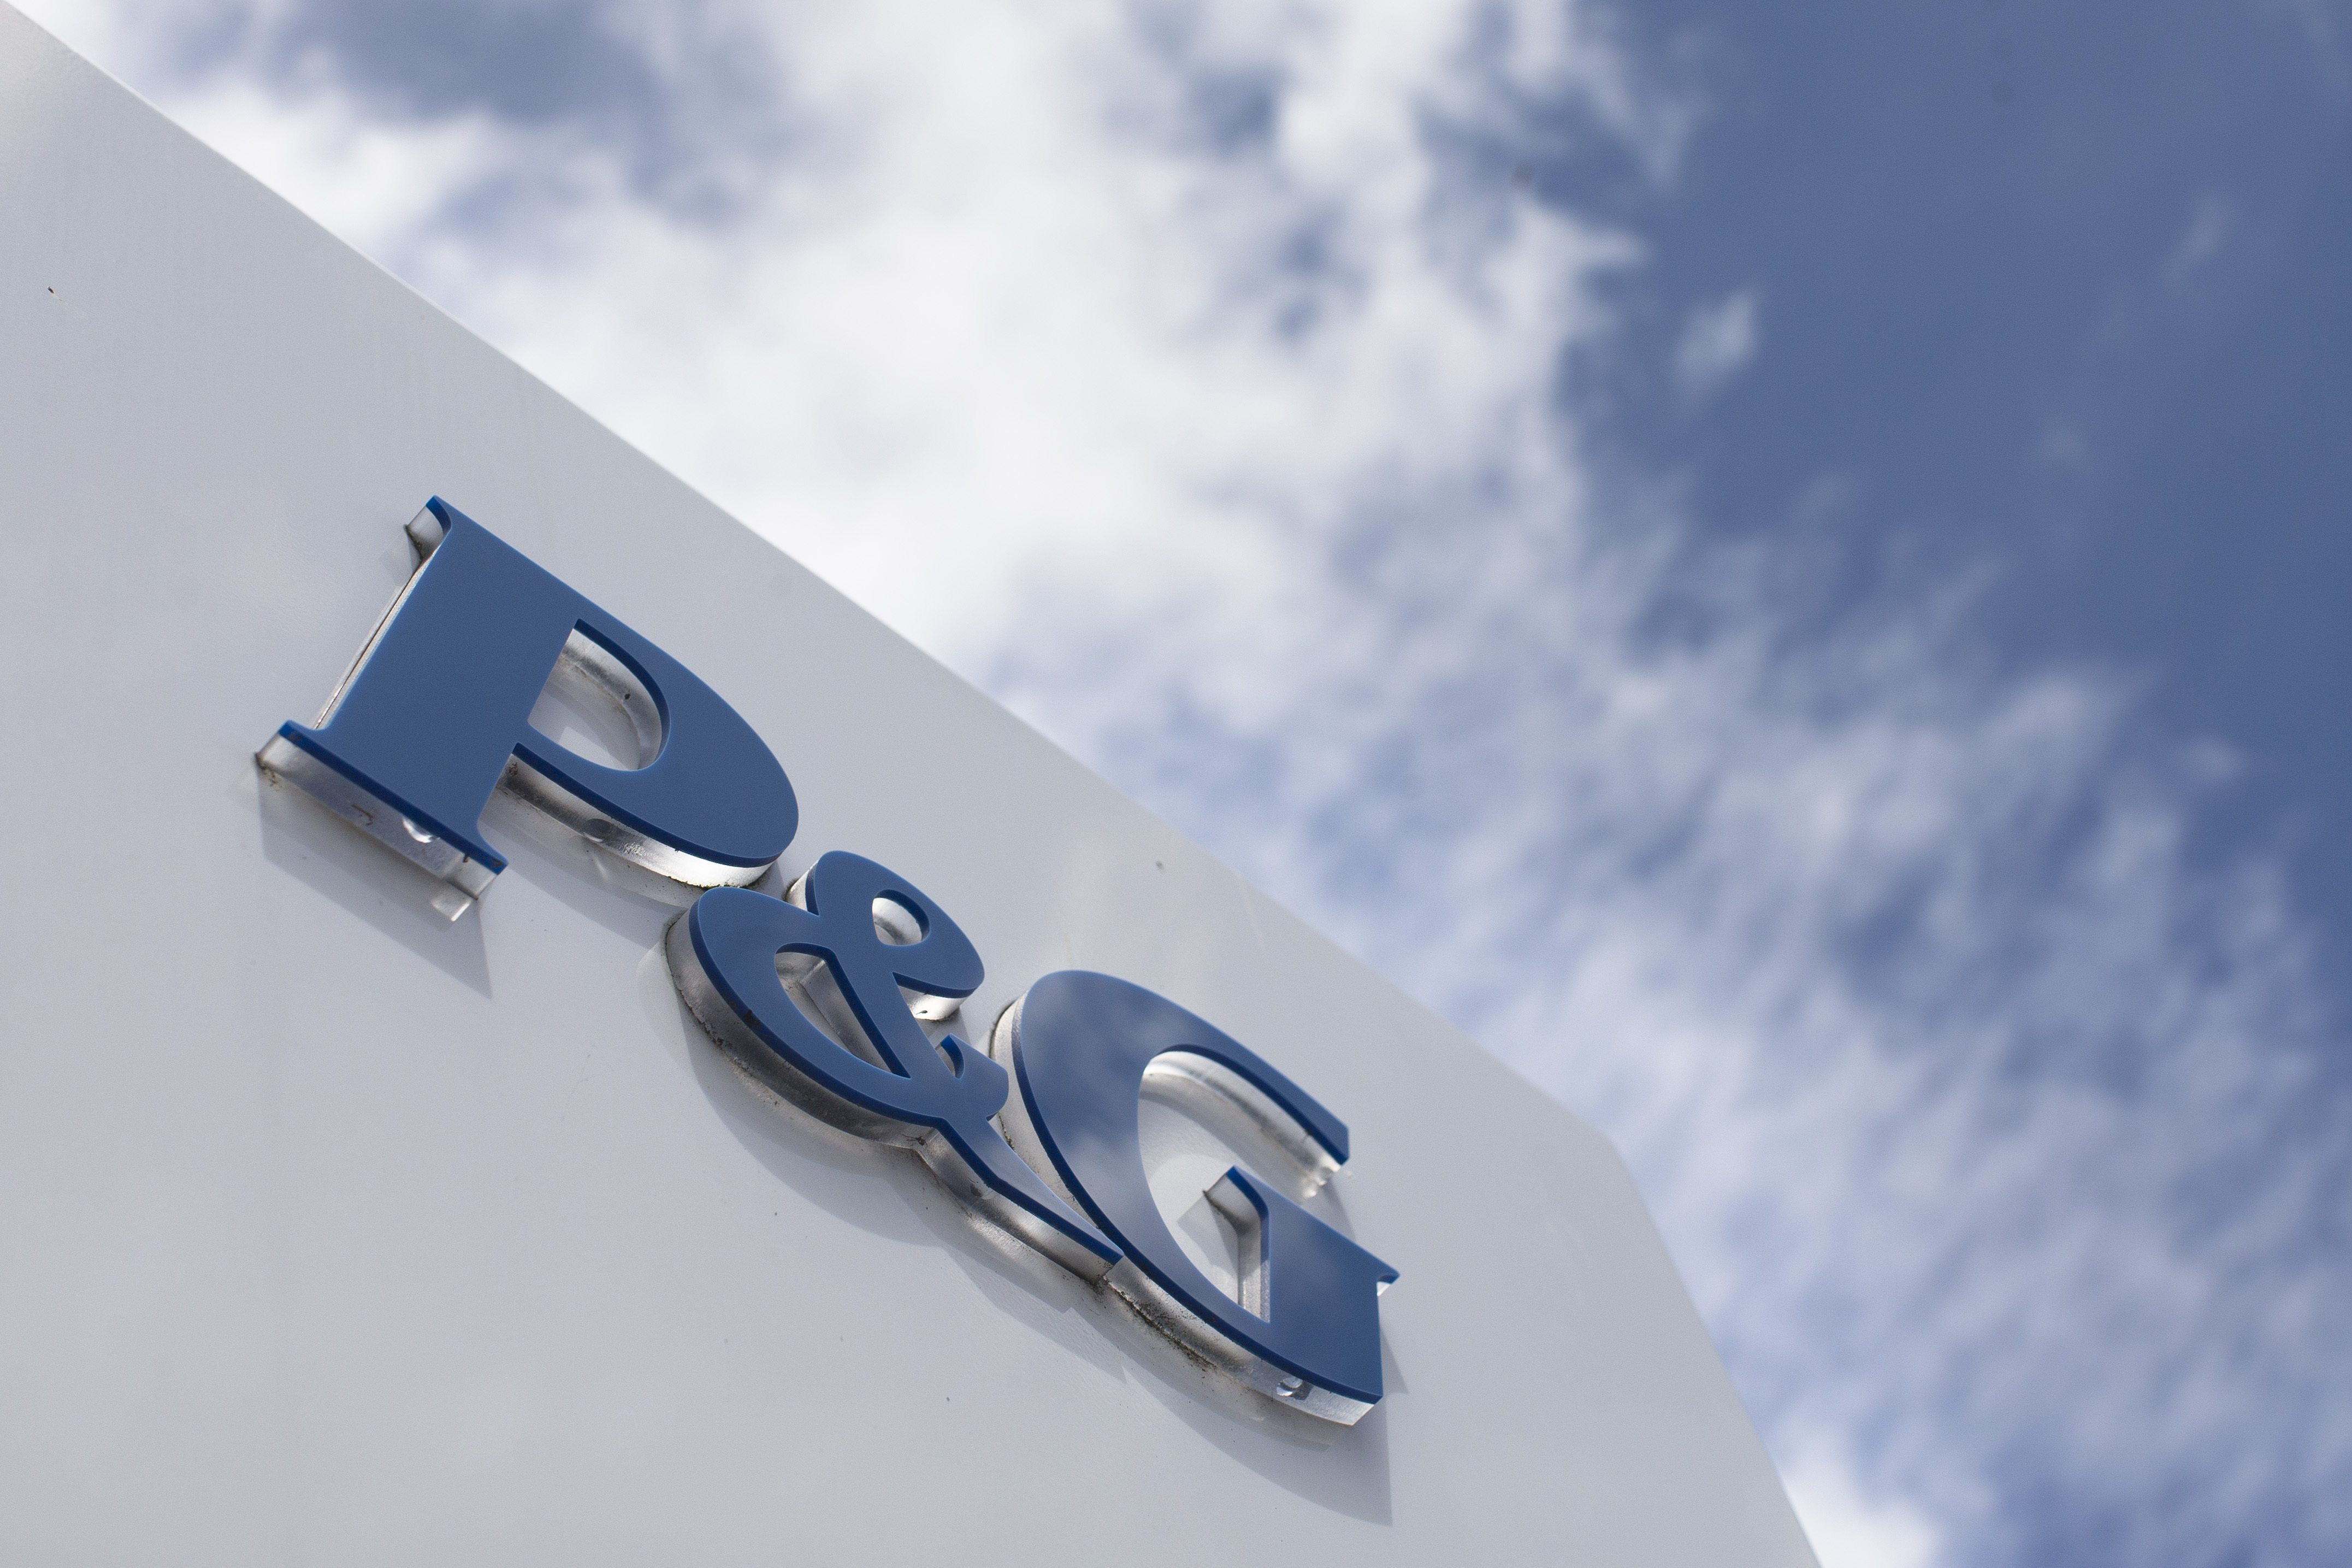 Procter & Gamble to sell off half its brands